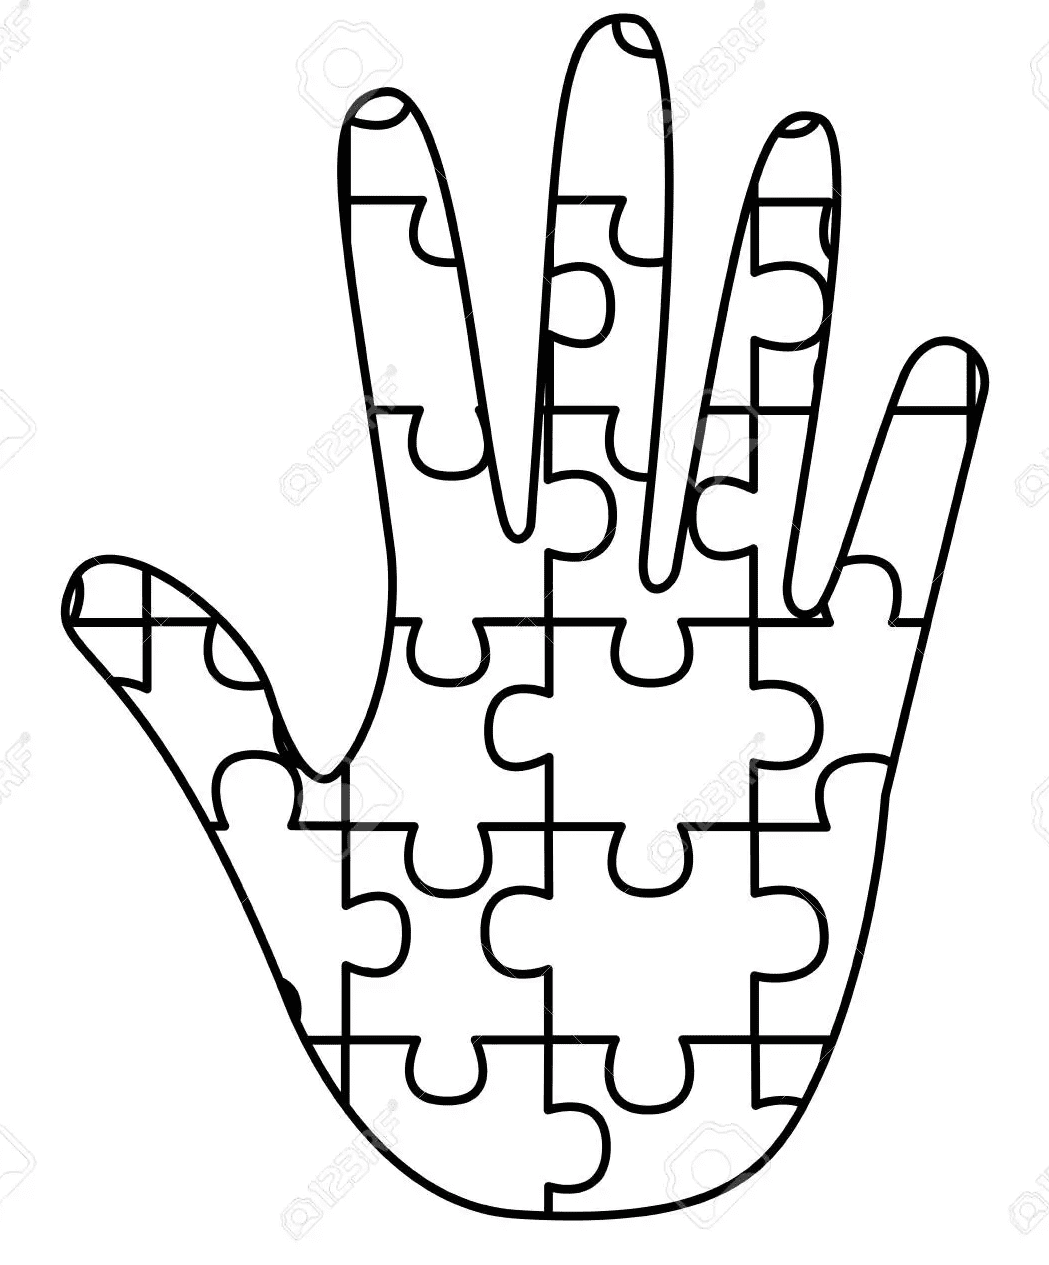 Hand Puzzle Pieces For Autism Awareness Coloring Pages